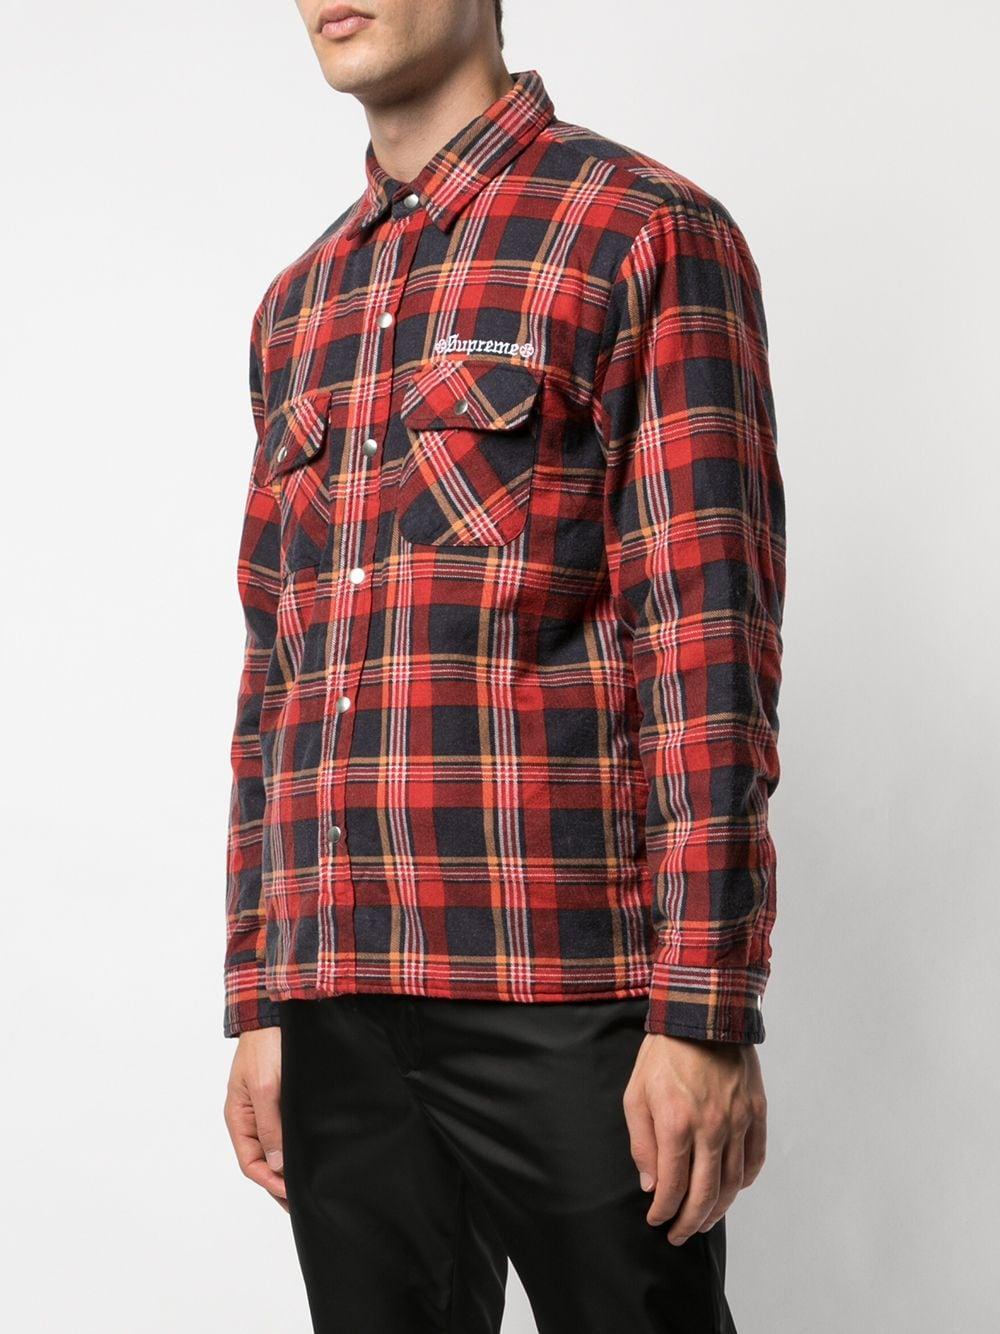 Supreme Quilted Plaid Flannel Shirt Lサイズ | myglobaltax.com